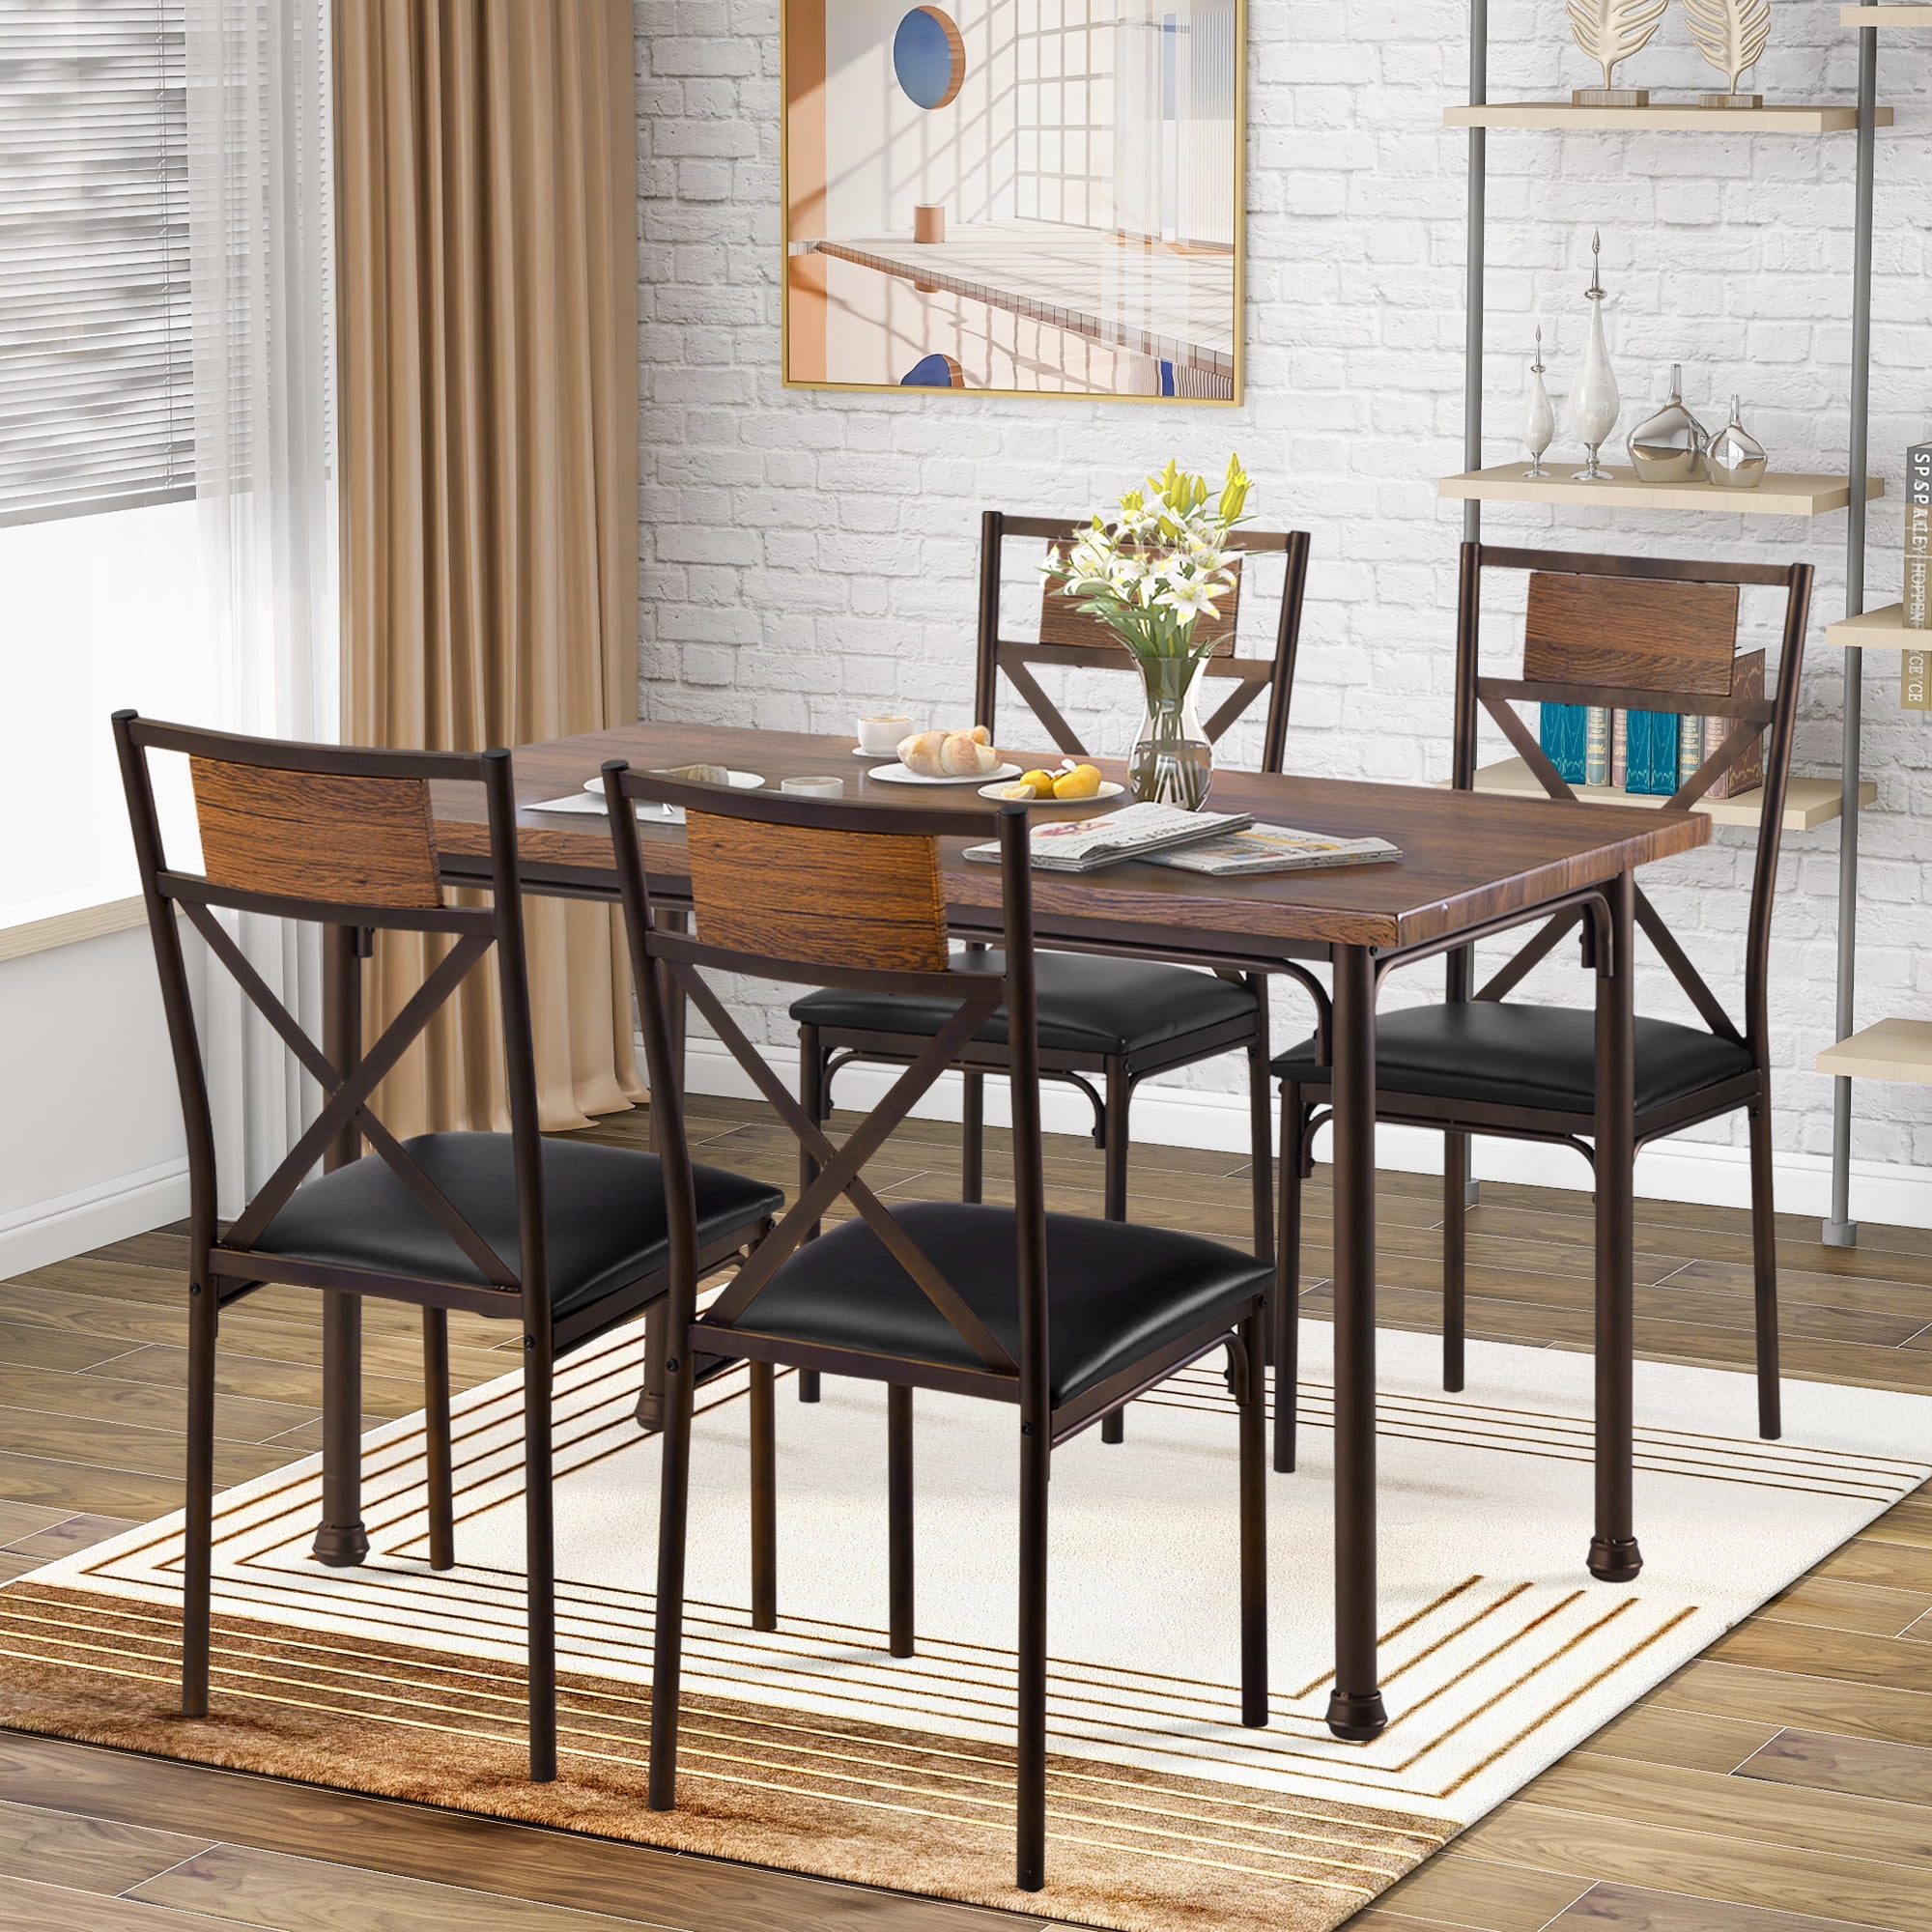 Kitchen Table and 4 Chairs Set, URHOMEPRO 5 Piece Industrial Dining